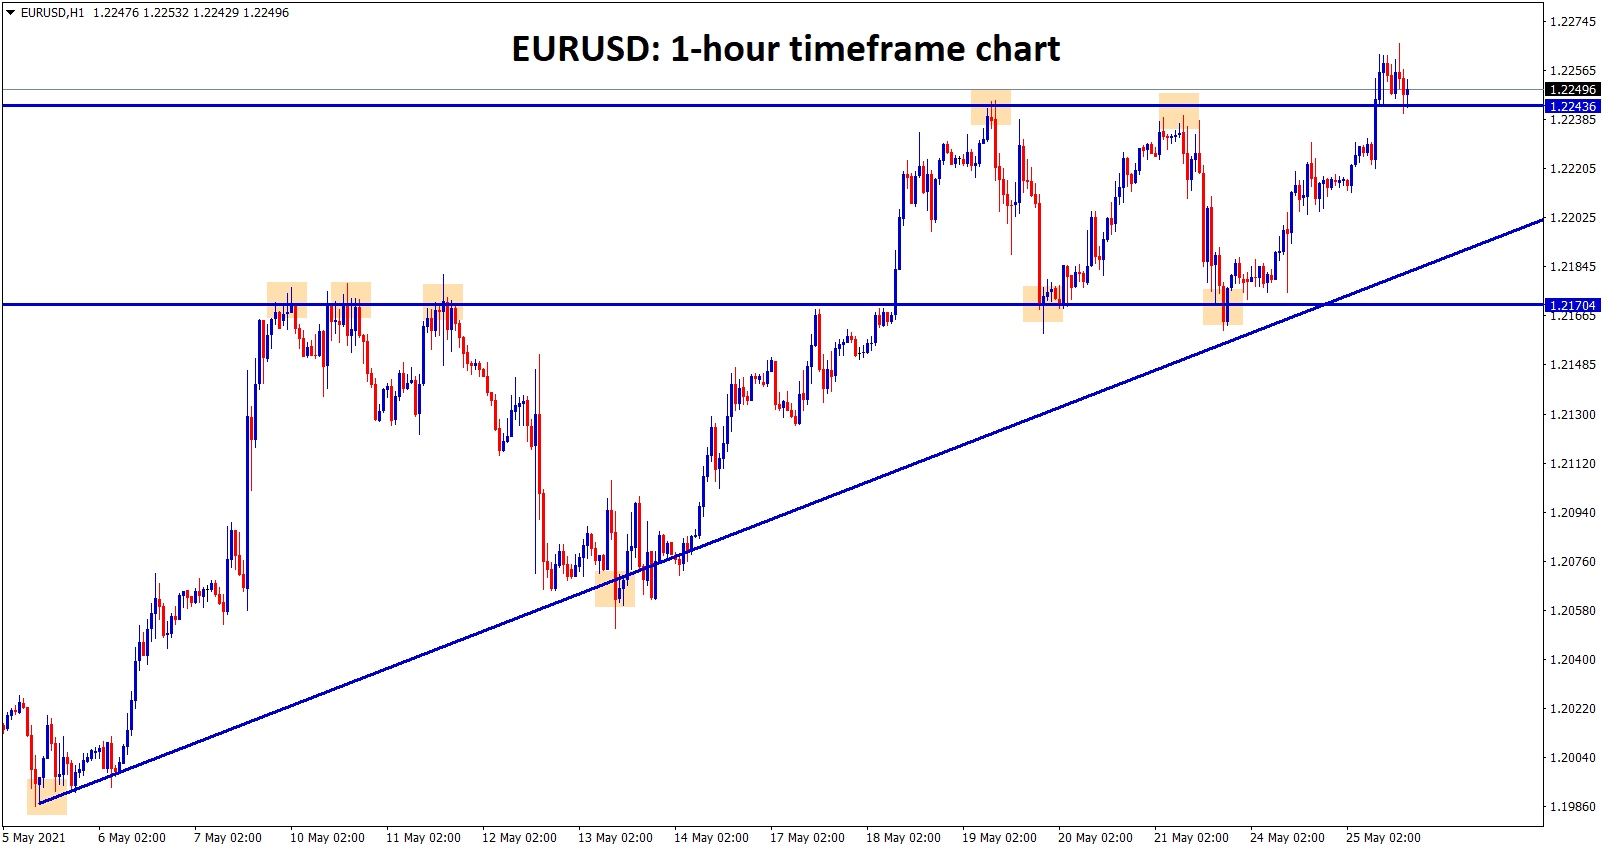 EURUSD reached the top resistance level by continuing its uptrend